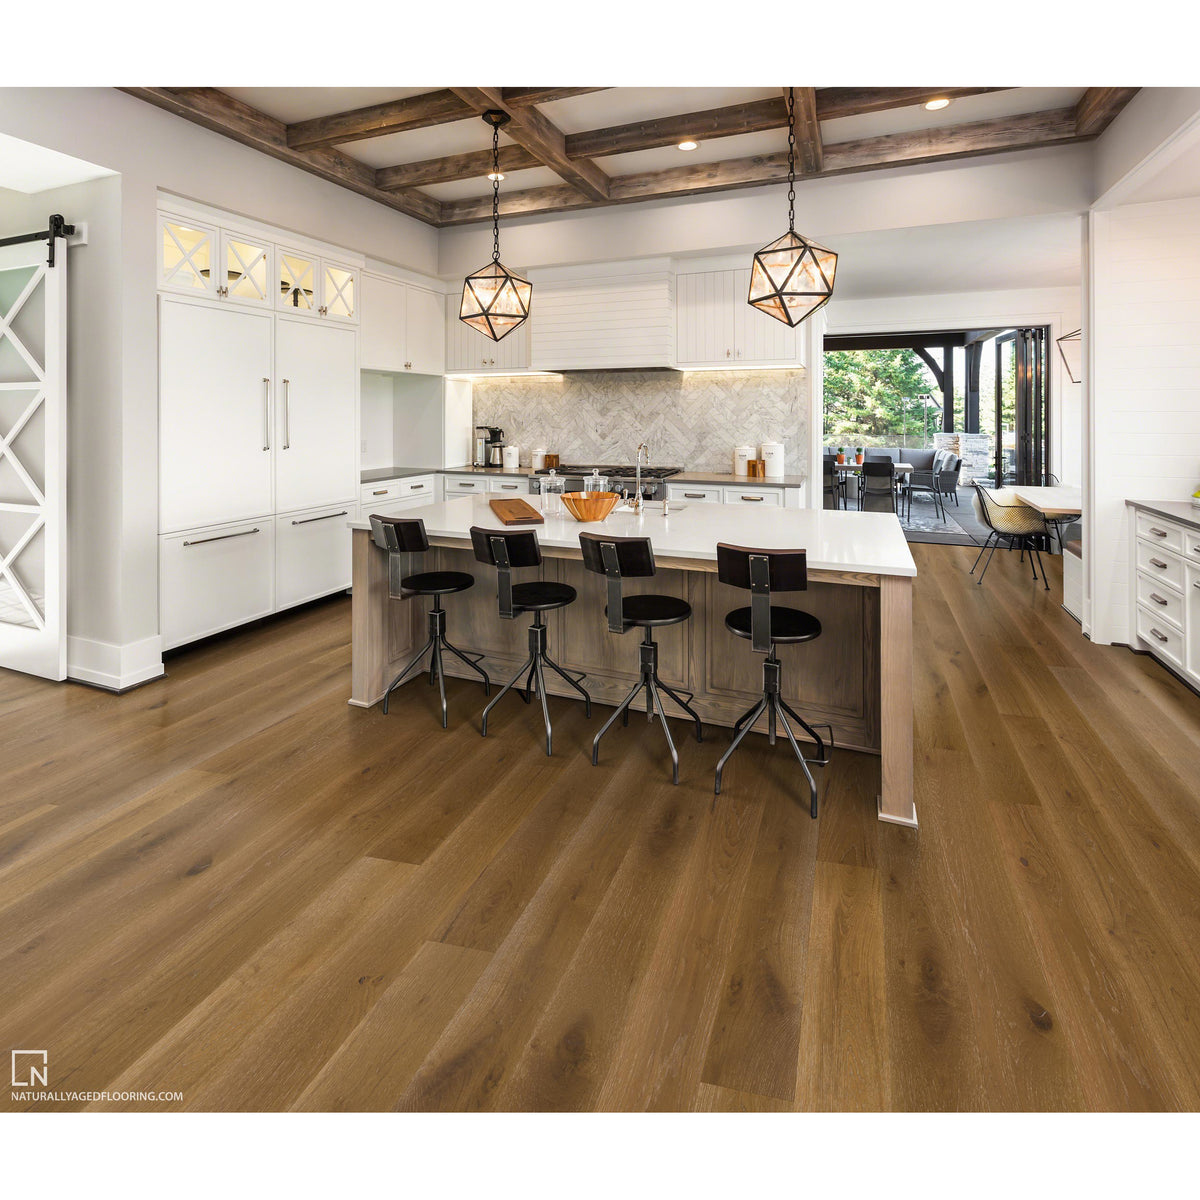 Naturally Aged Flooring - Pinnacle Collection - Meridian Room Scene